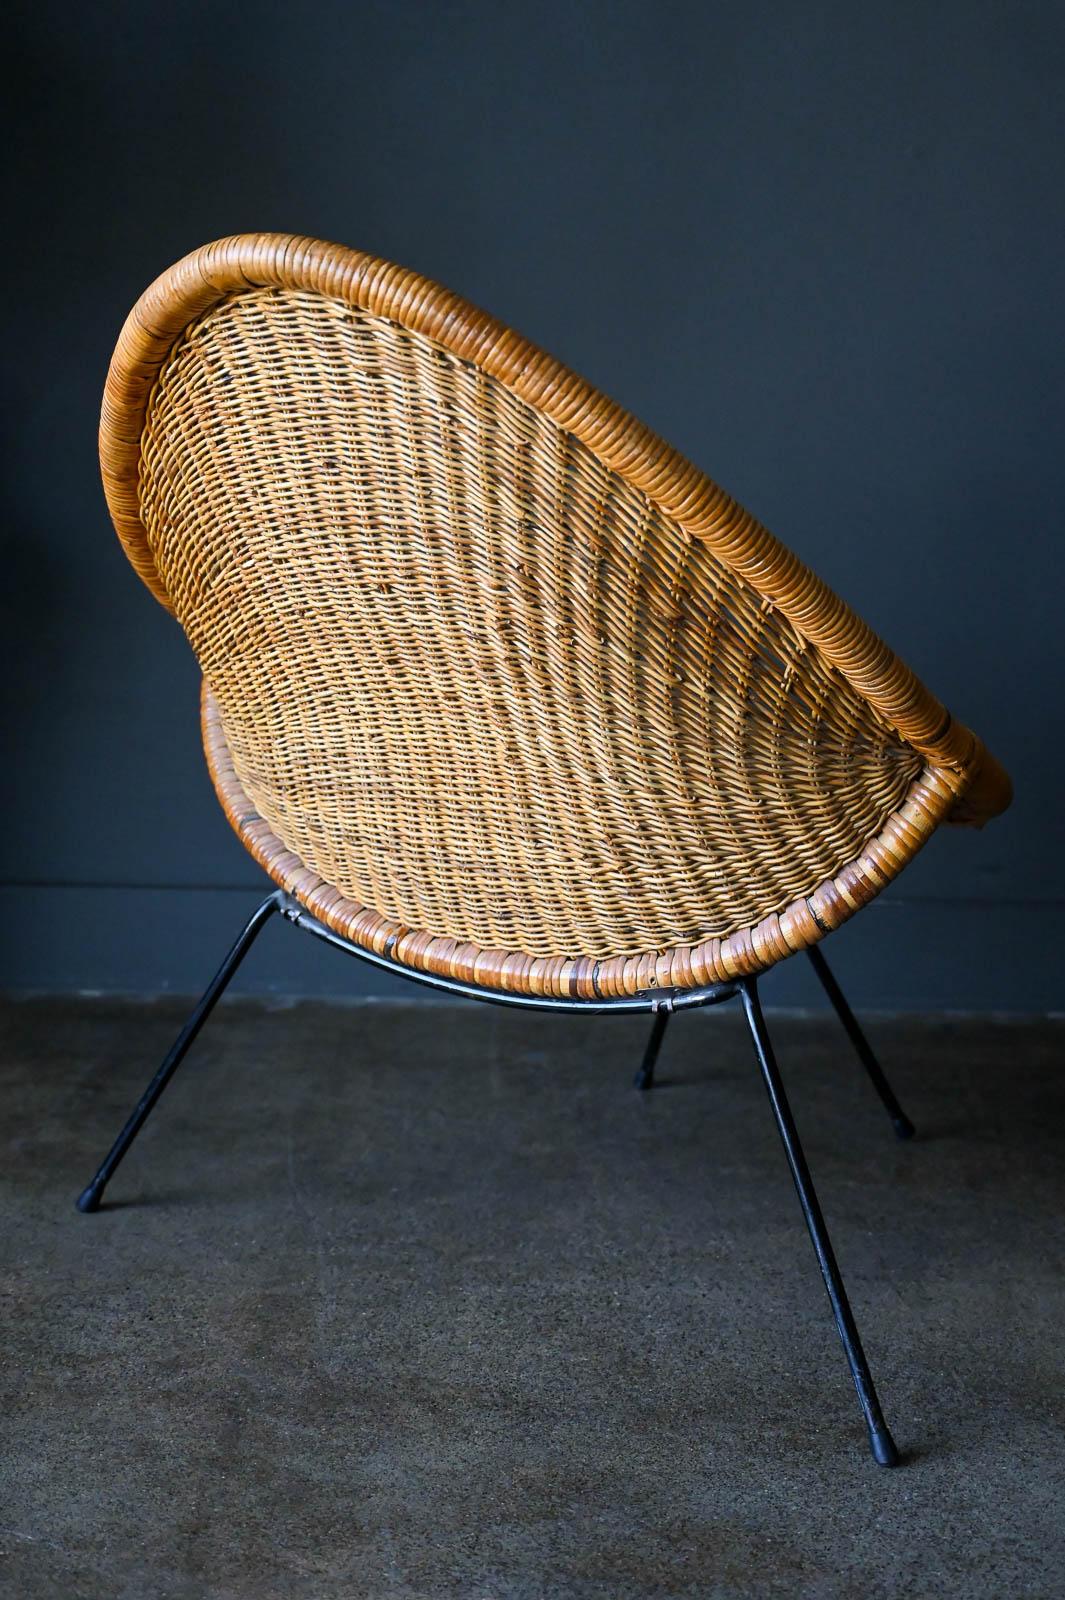 Vintage Italian Rattan and Iron Scoop Chairs and Table, ca. 1950 For Sale 4